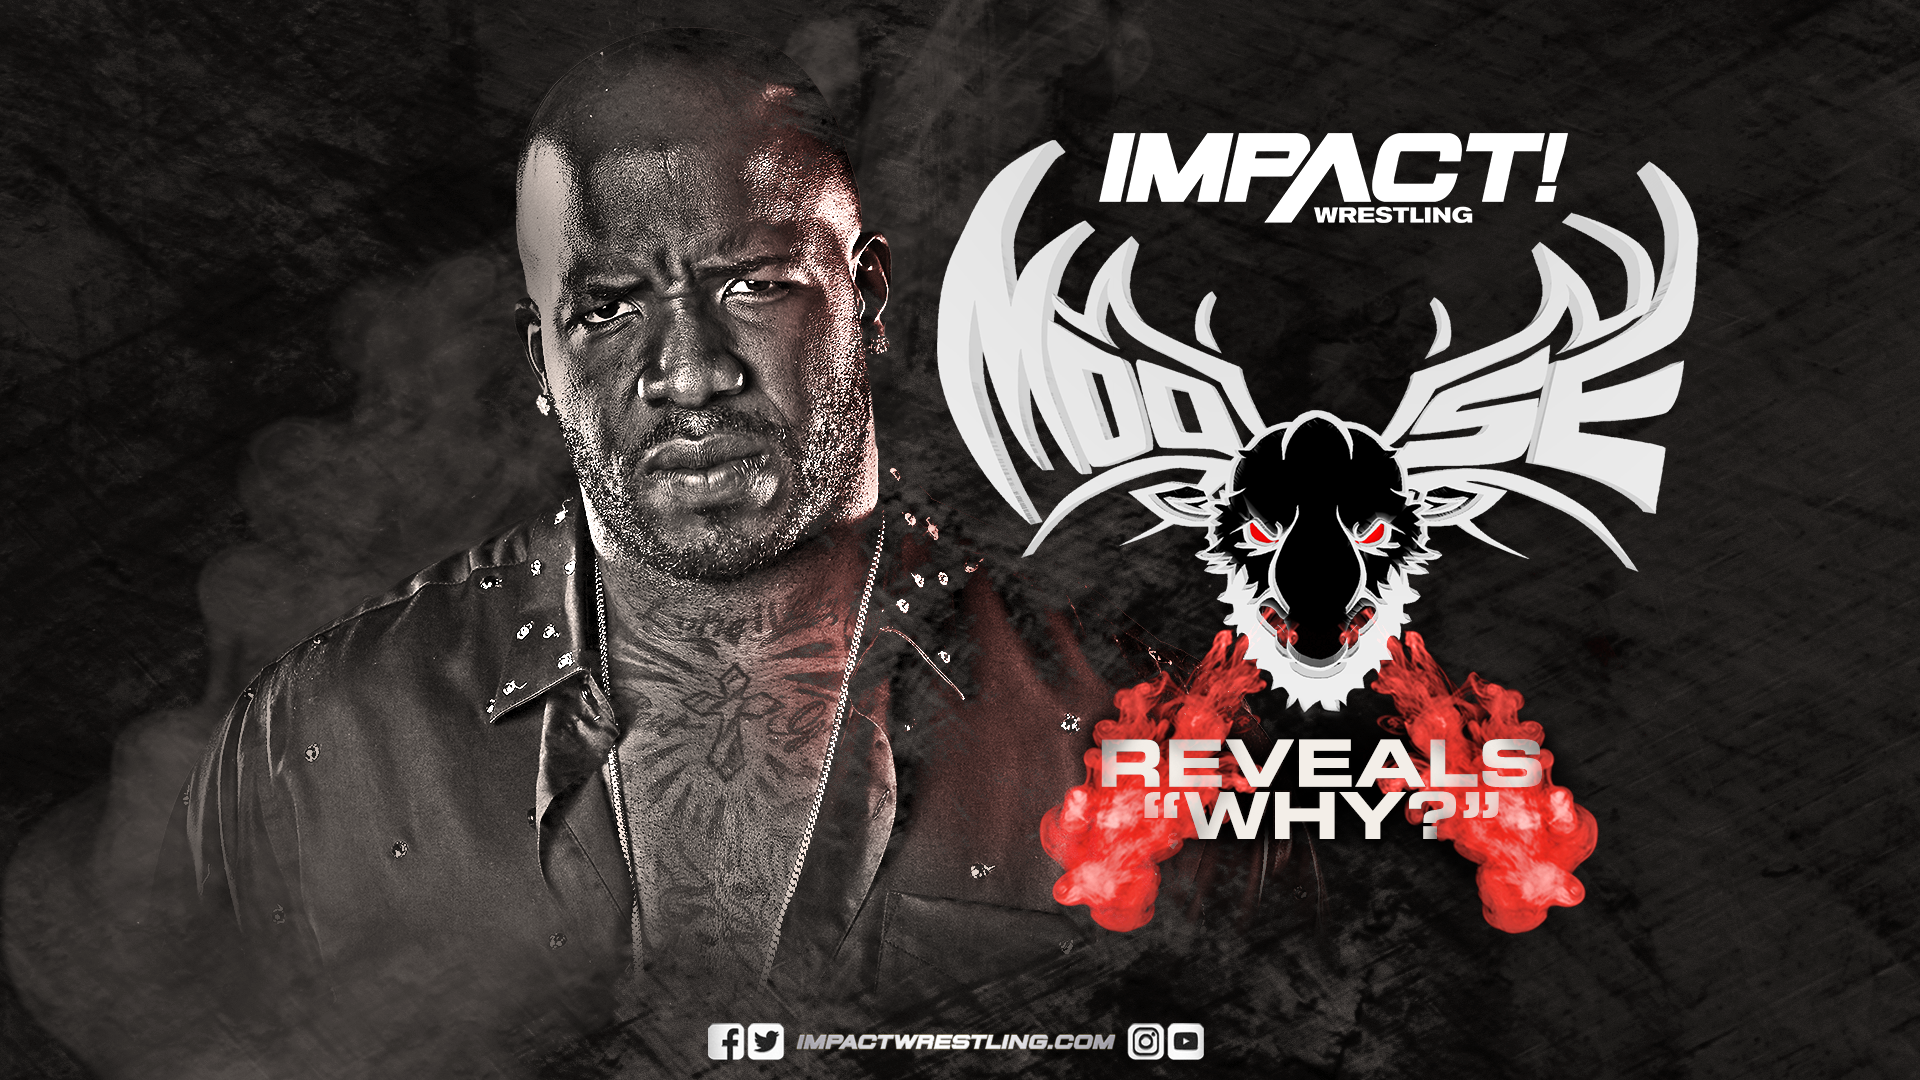 Impact Wrestling Preview & Discussion For 9/6; Moose Reveals Why, Su Yung Challenges Tessa Blanchard, More